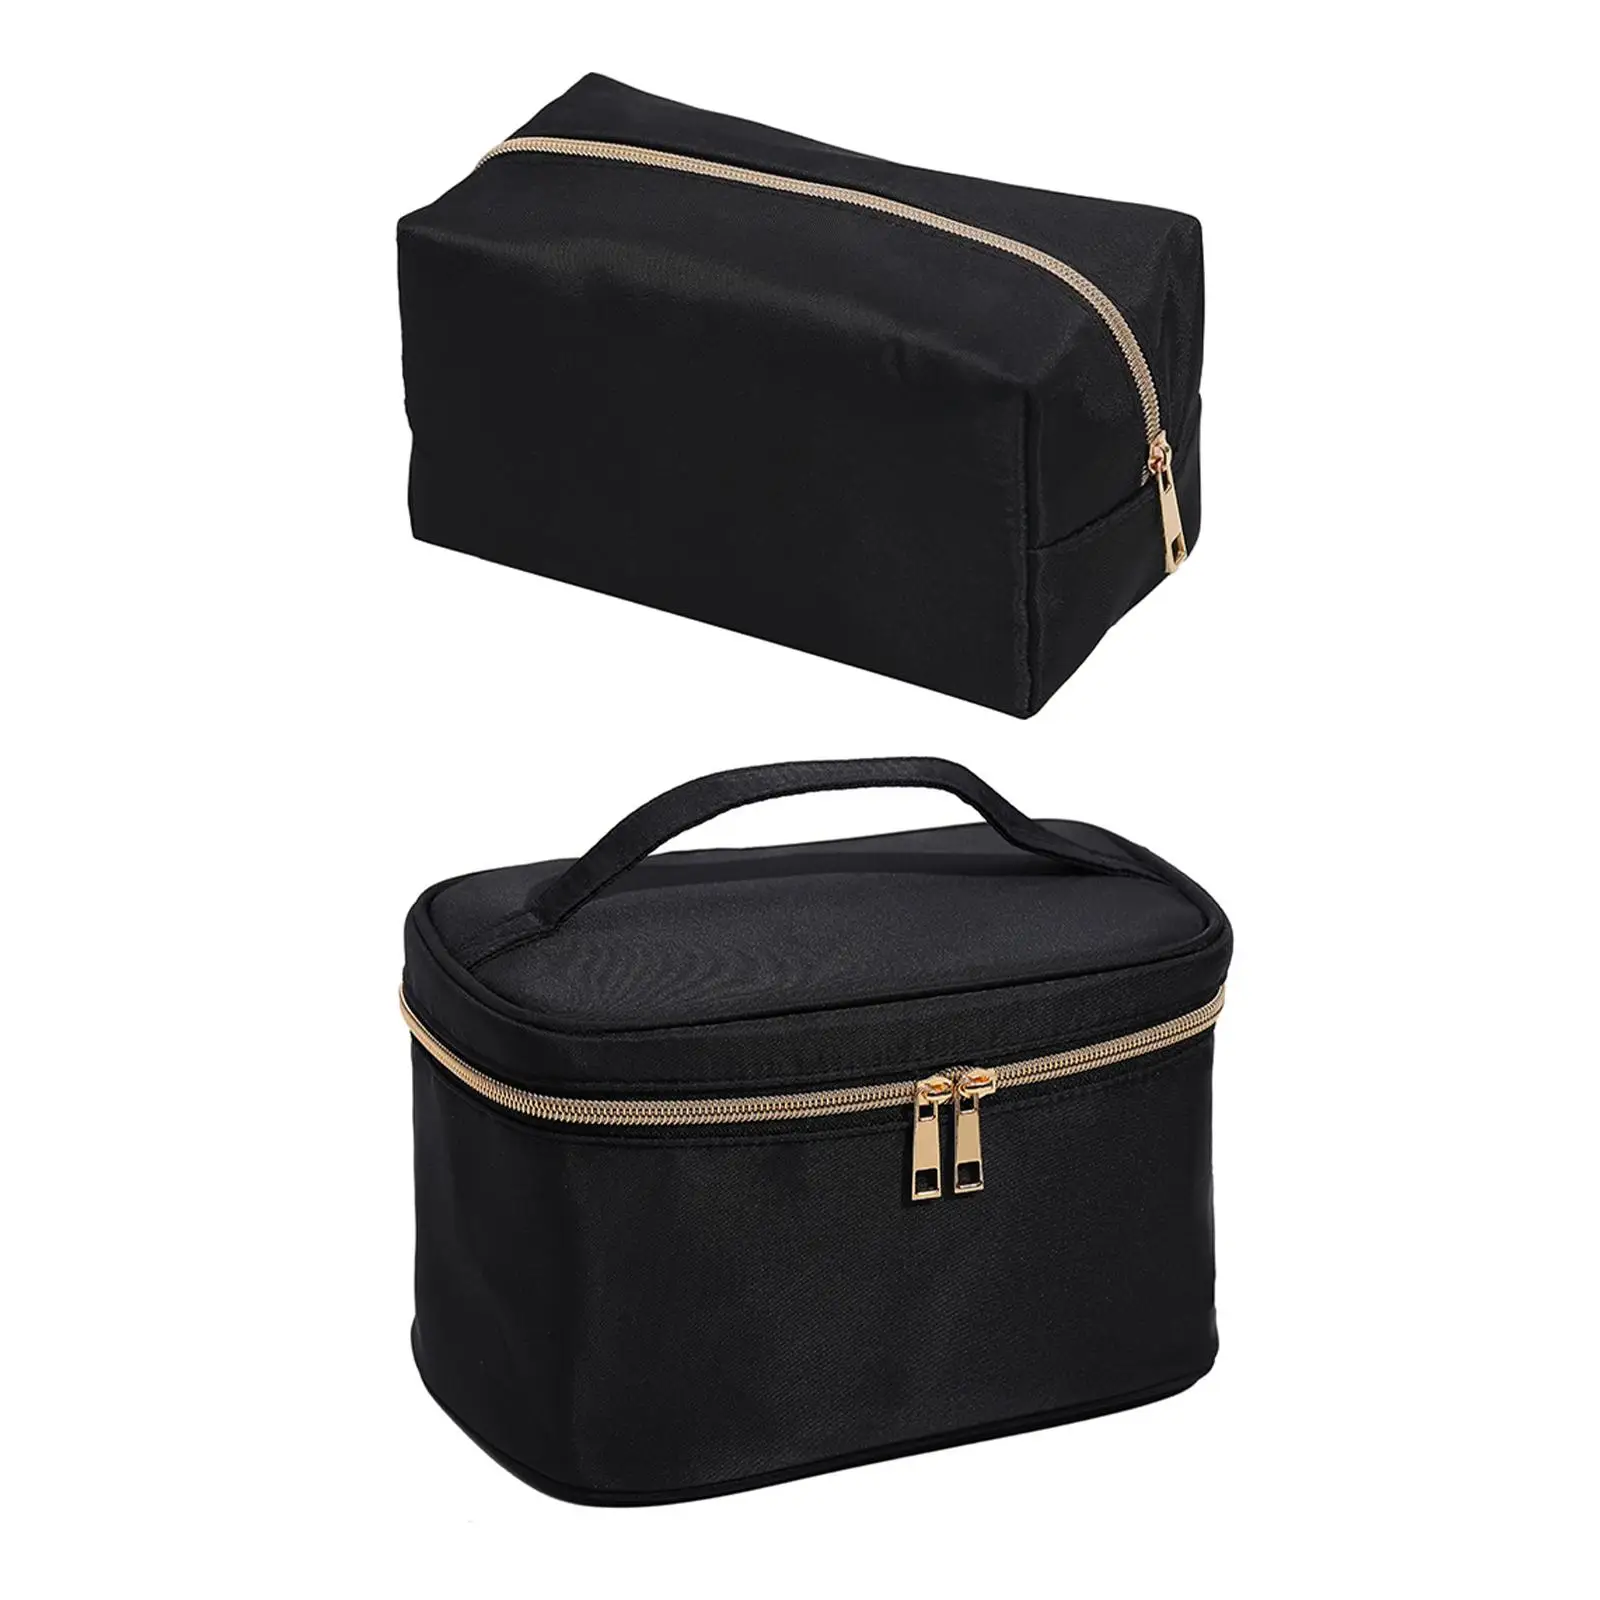 Travel Makeup Bag Lightweight Large Capacity Durable Cosmetic Pouch for Traveling Business Trip Hair Accessories Gym Toiletries